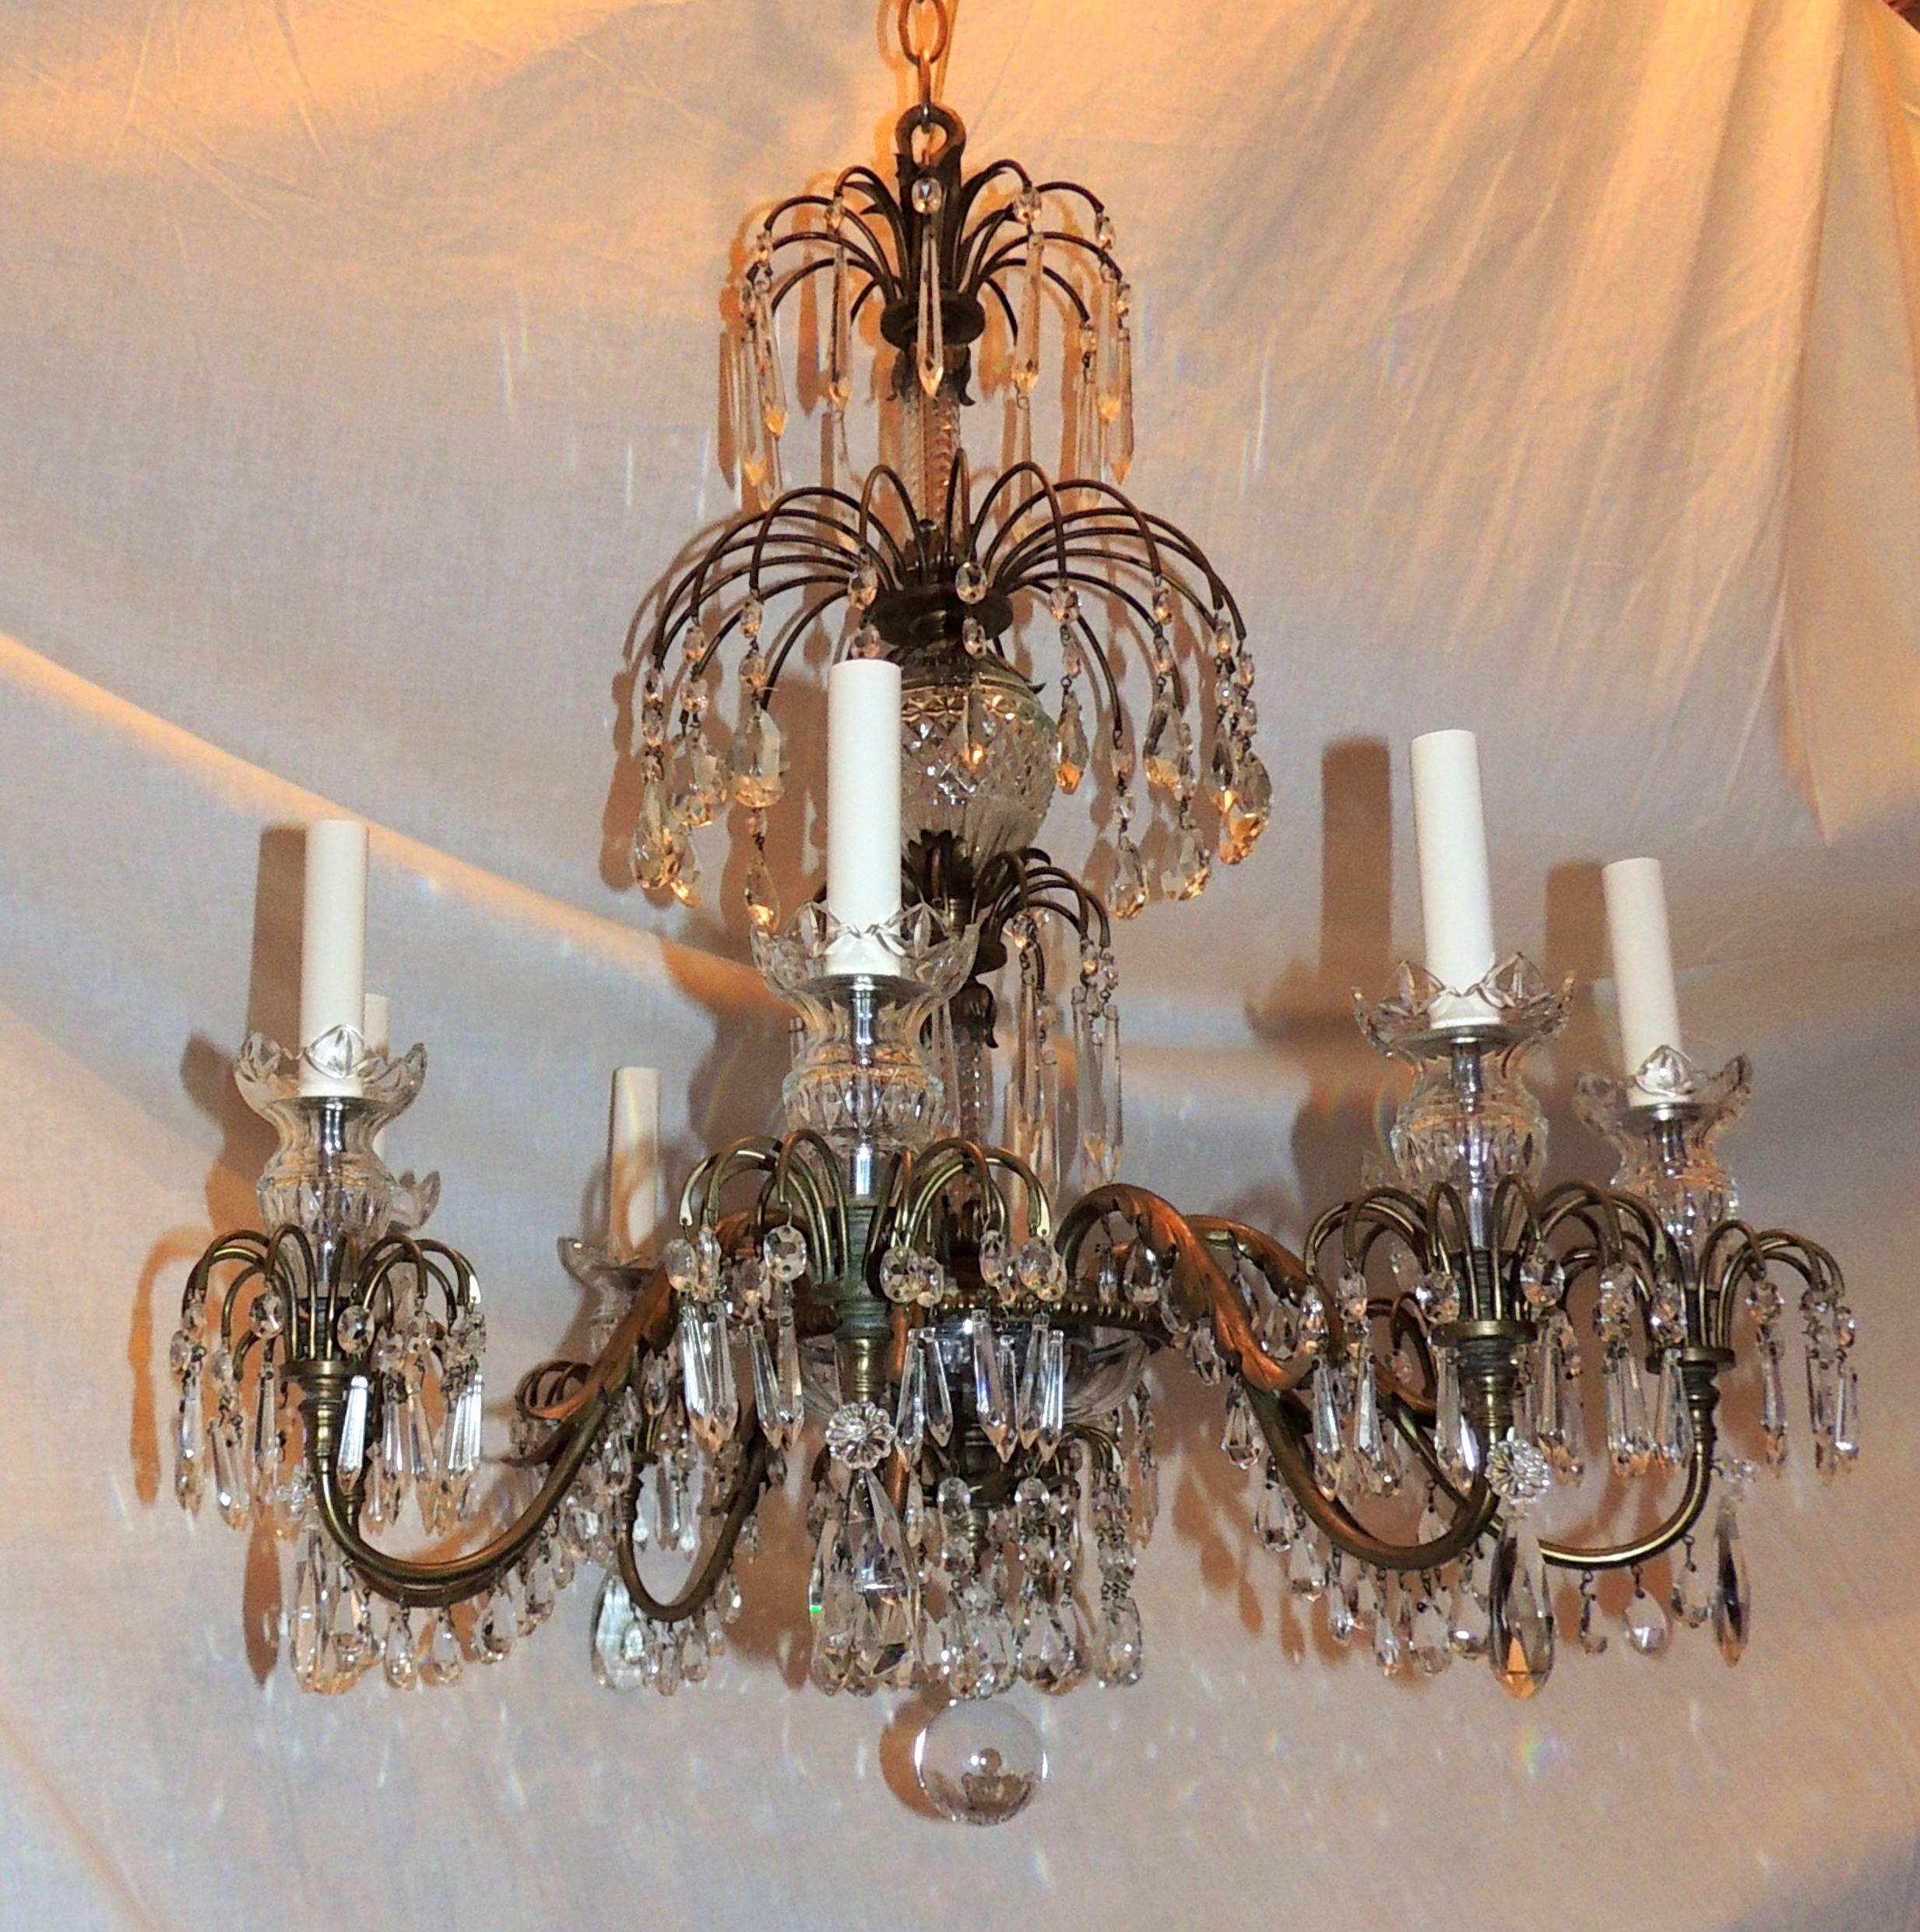 Wonderful French Neoclassical Bronze Crystal Regency Baltic Empire Chandelier For Sale 2